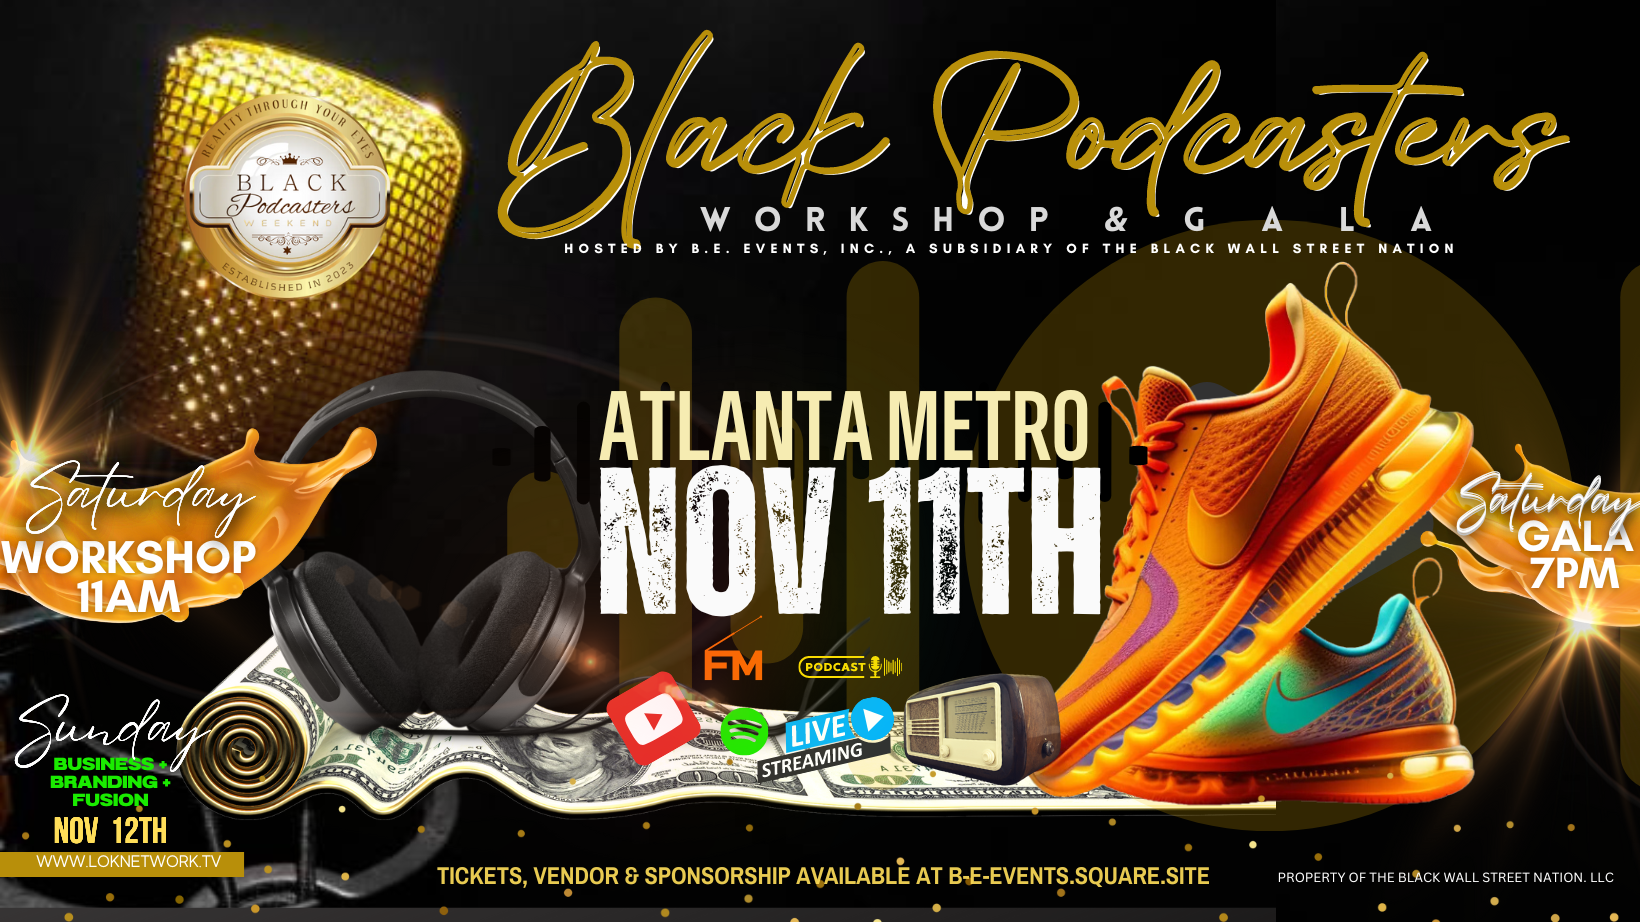 Photo for Black Podcasters Weekend on ViewStub